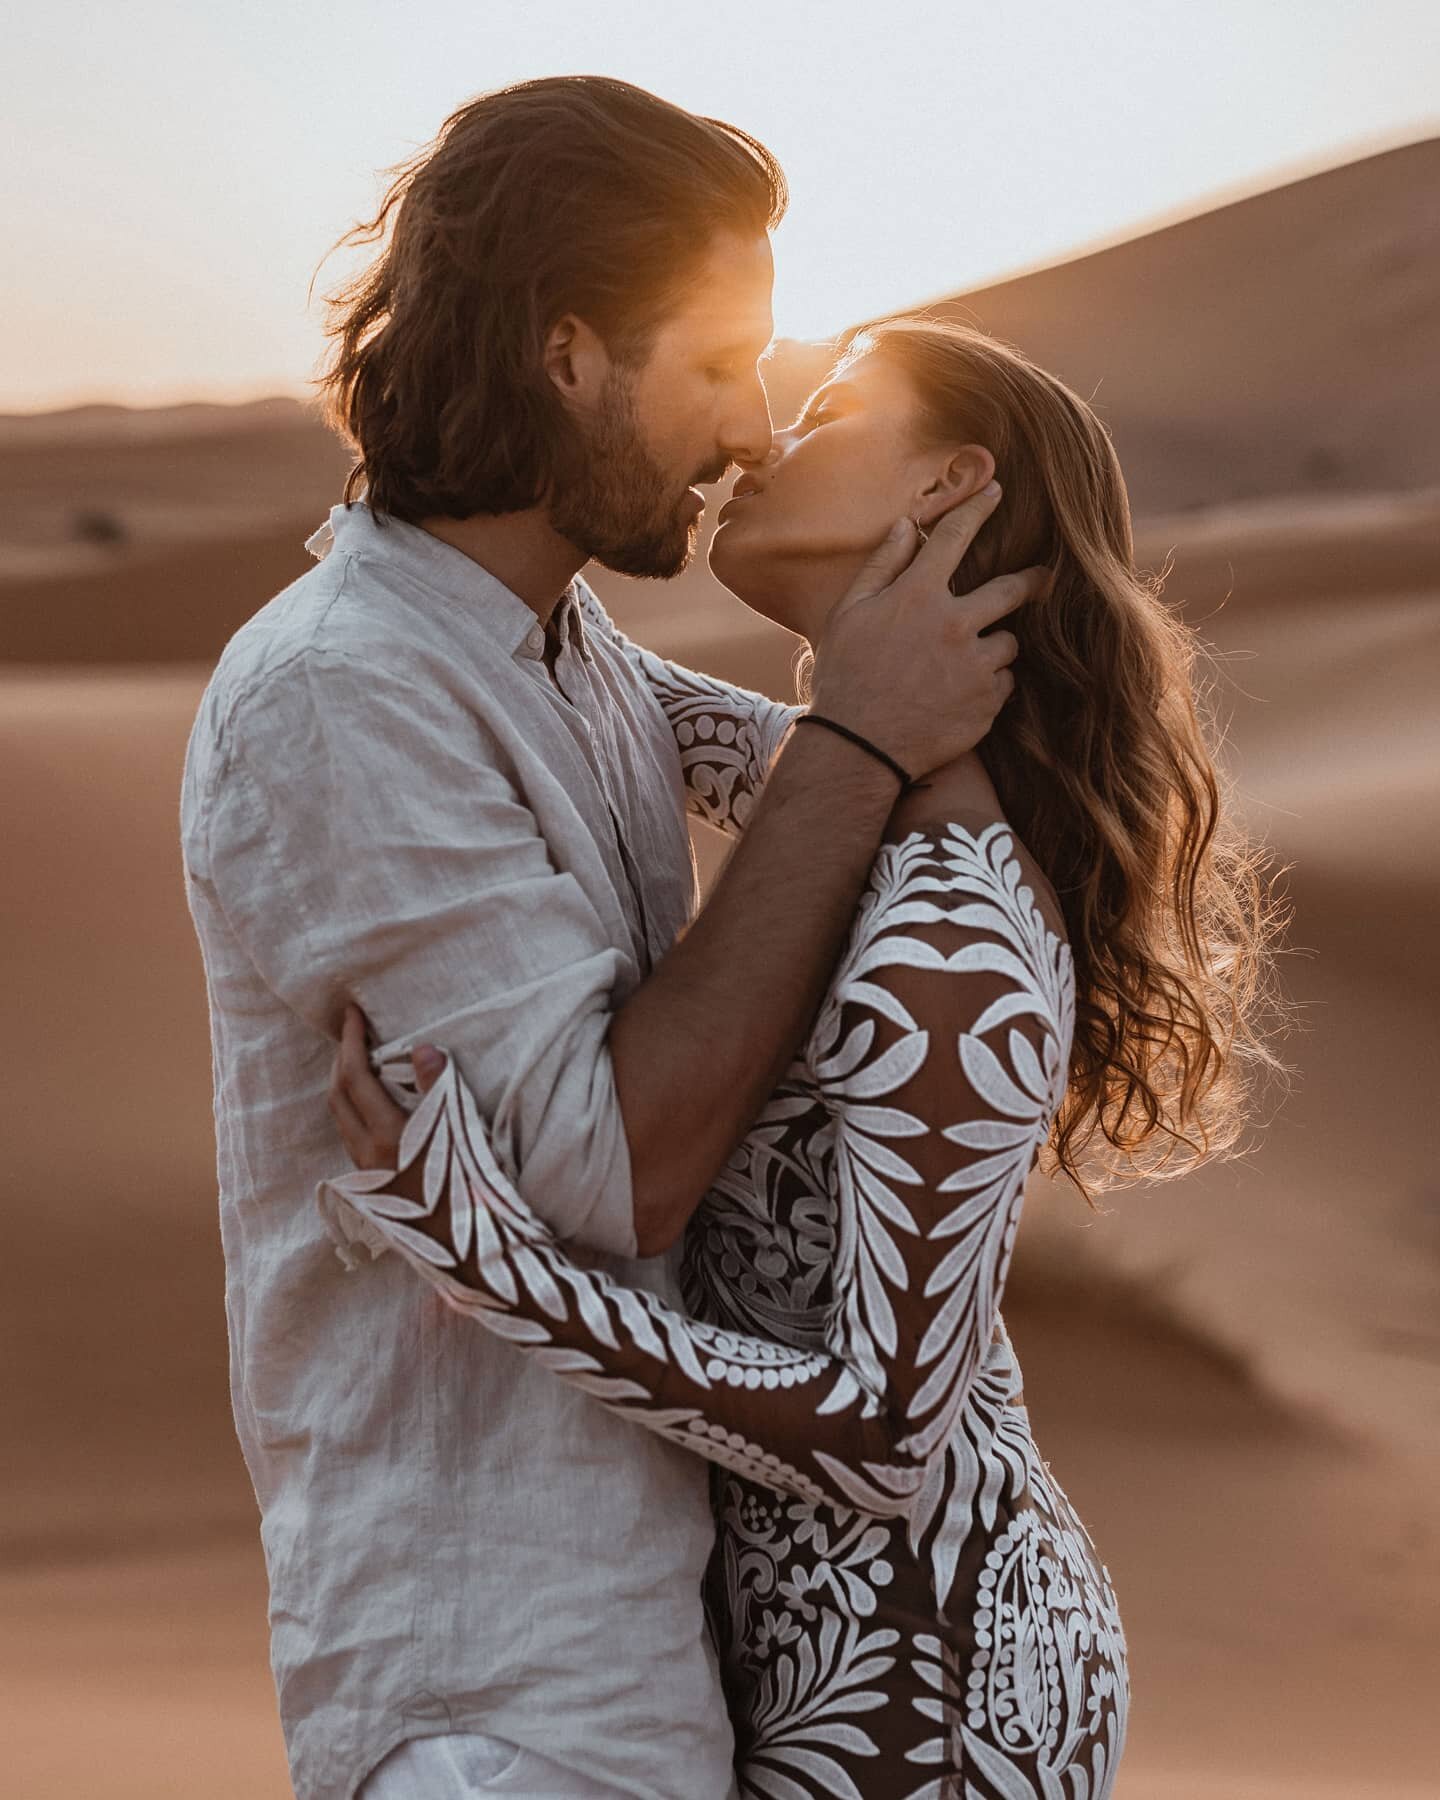 Throwback to the times when I had the ability to travel around the world capturing love stories.. This was shot in the Sahara desert, Morocco with the beautiful Serena and David 🔥